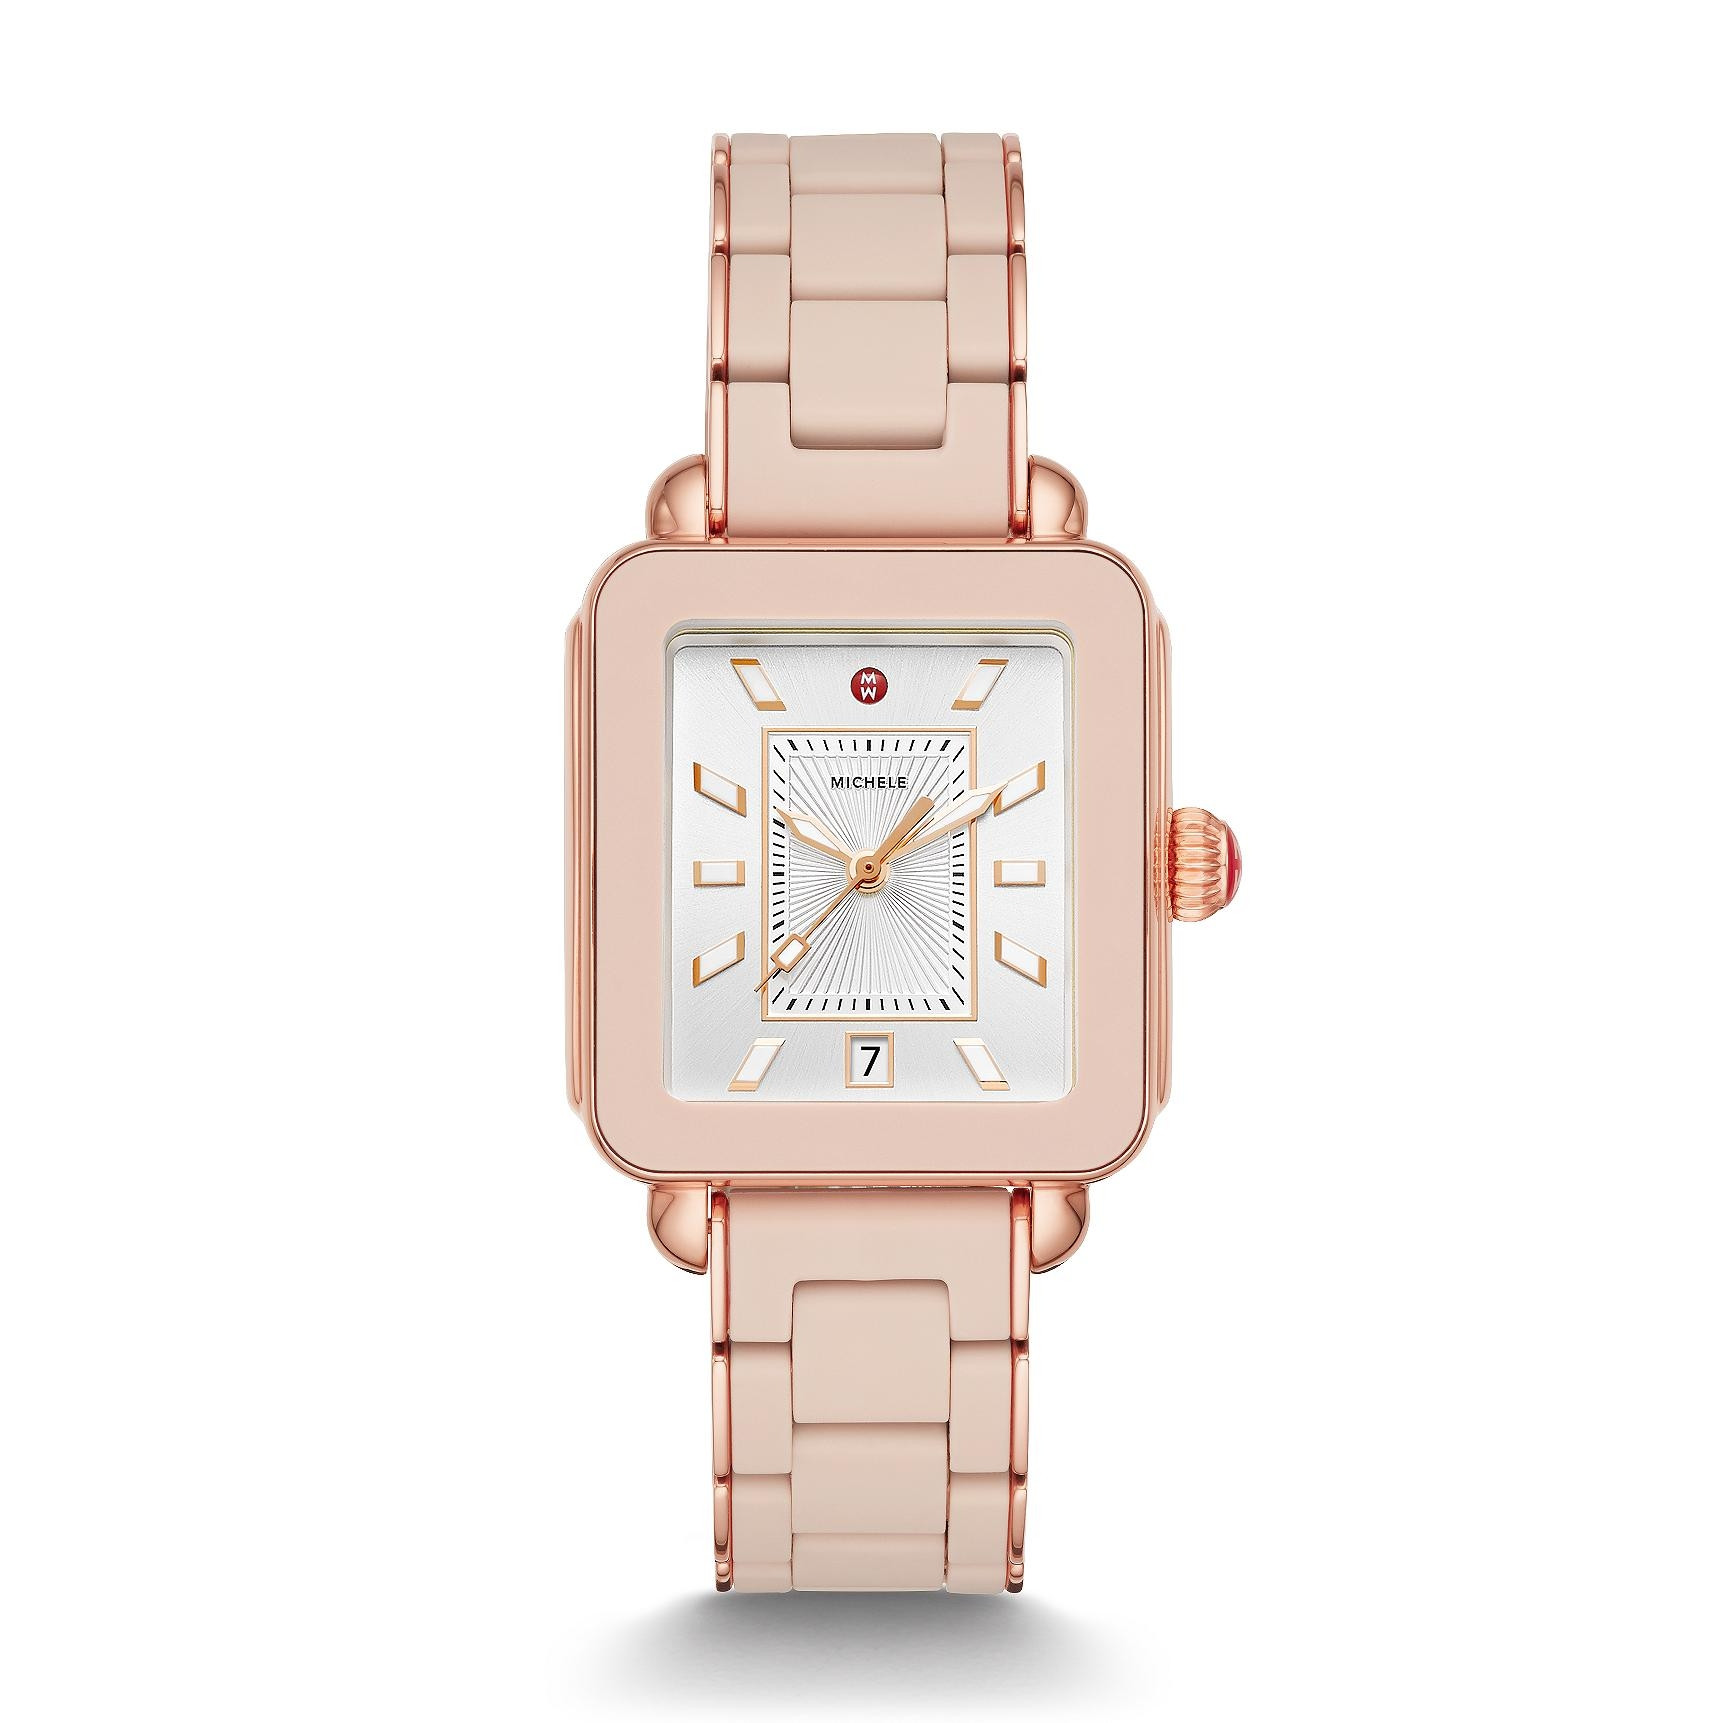 Michele Deco Sport Pink Gold Watch with Rose Rubber Link Strap